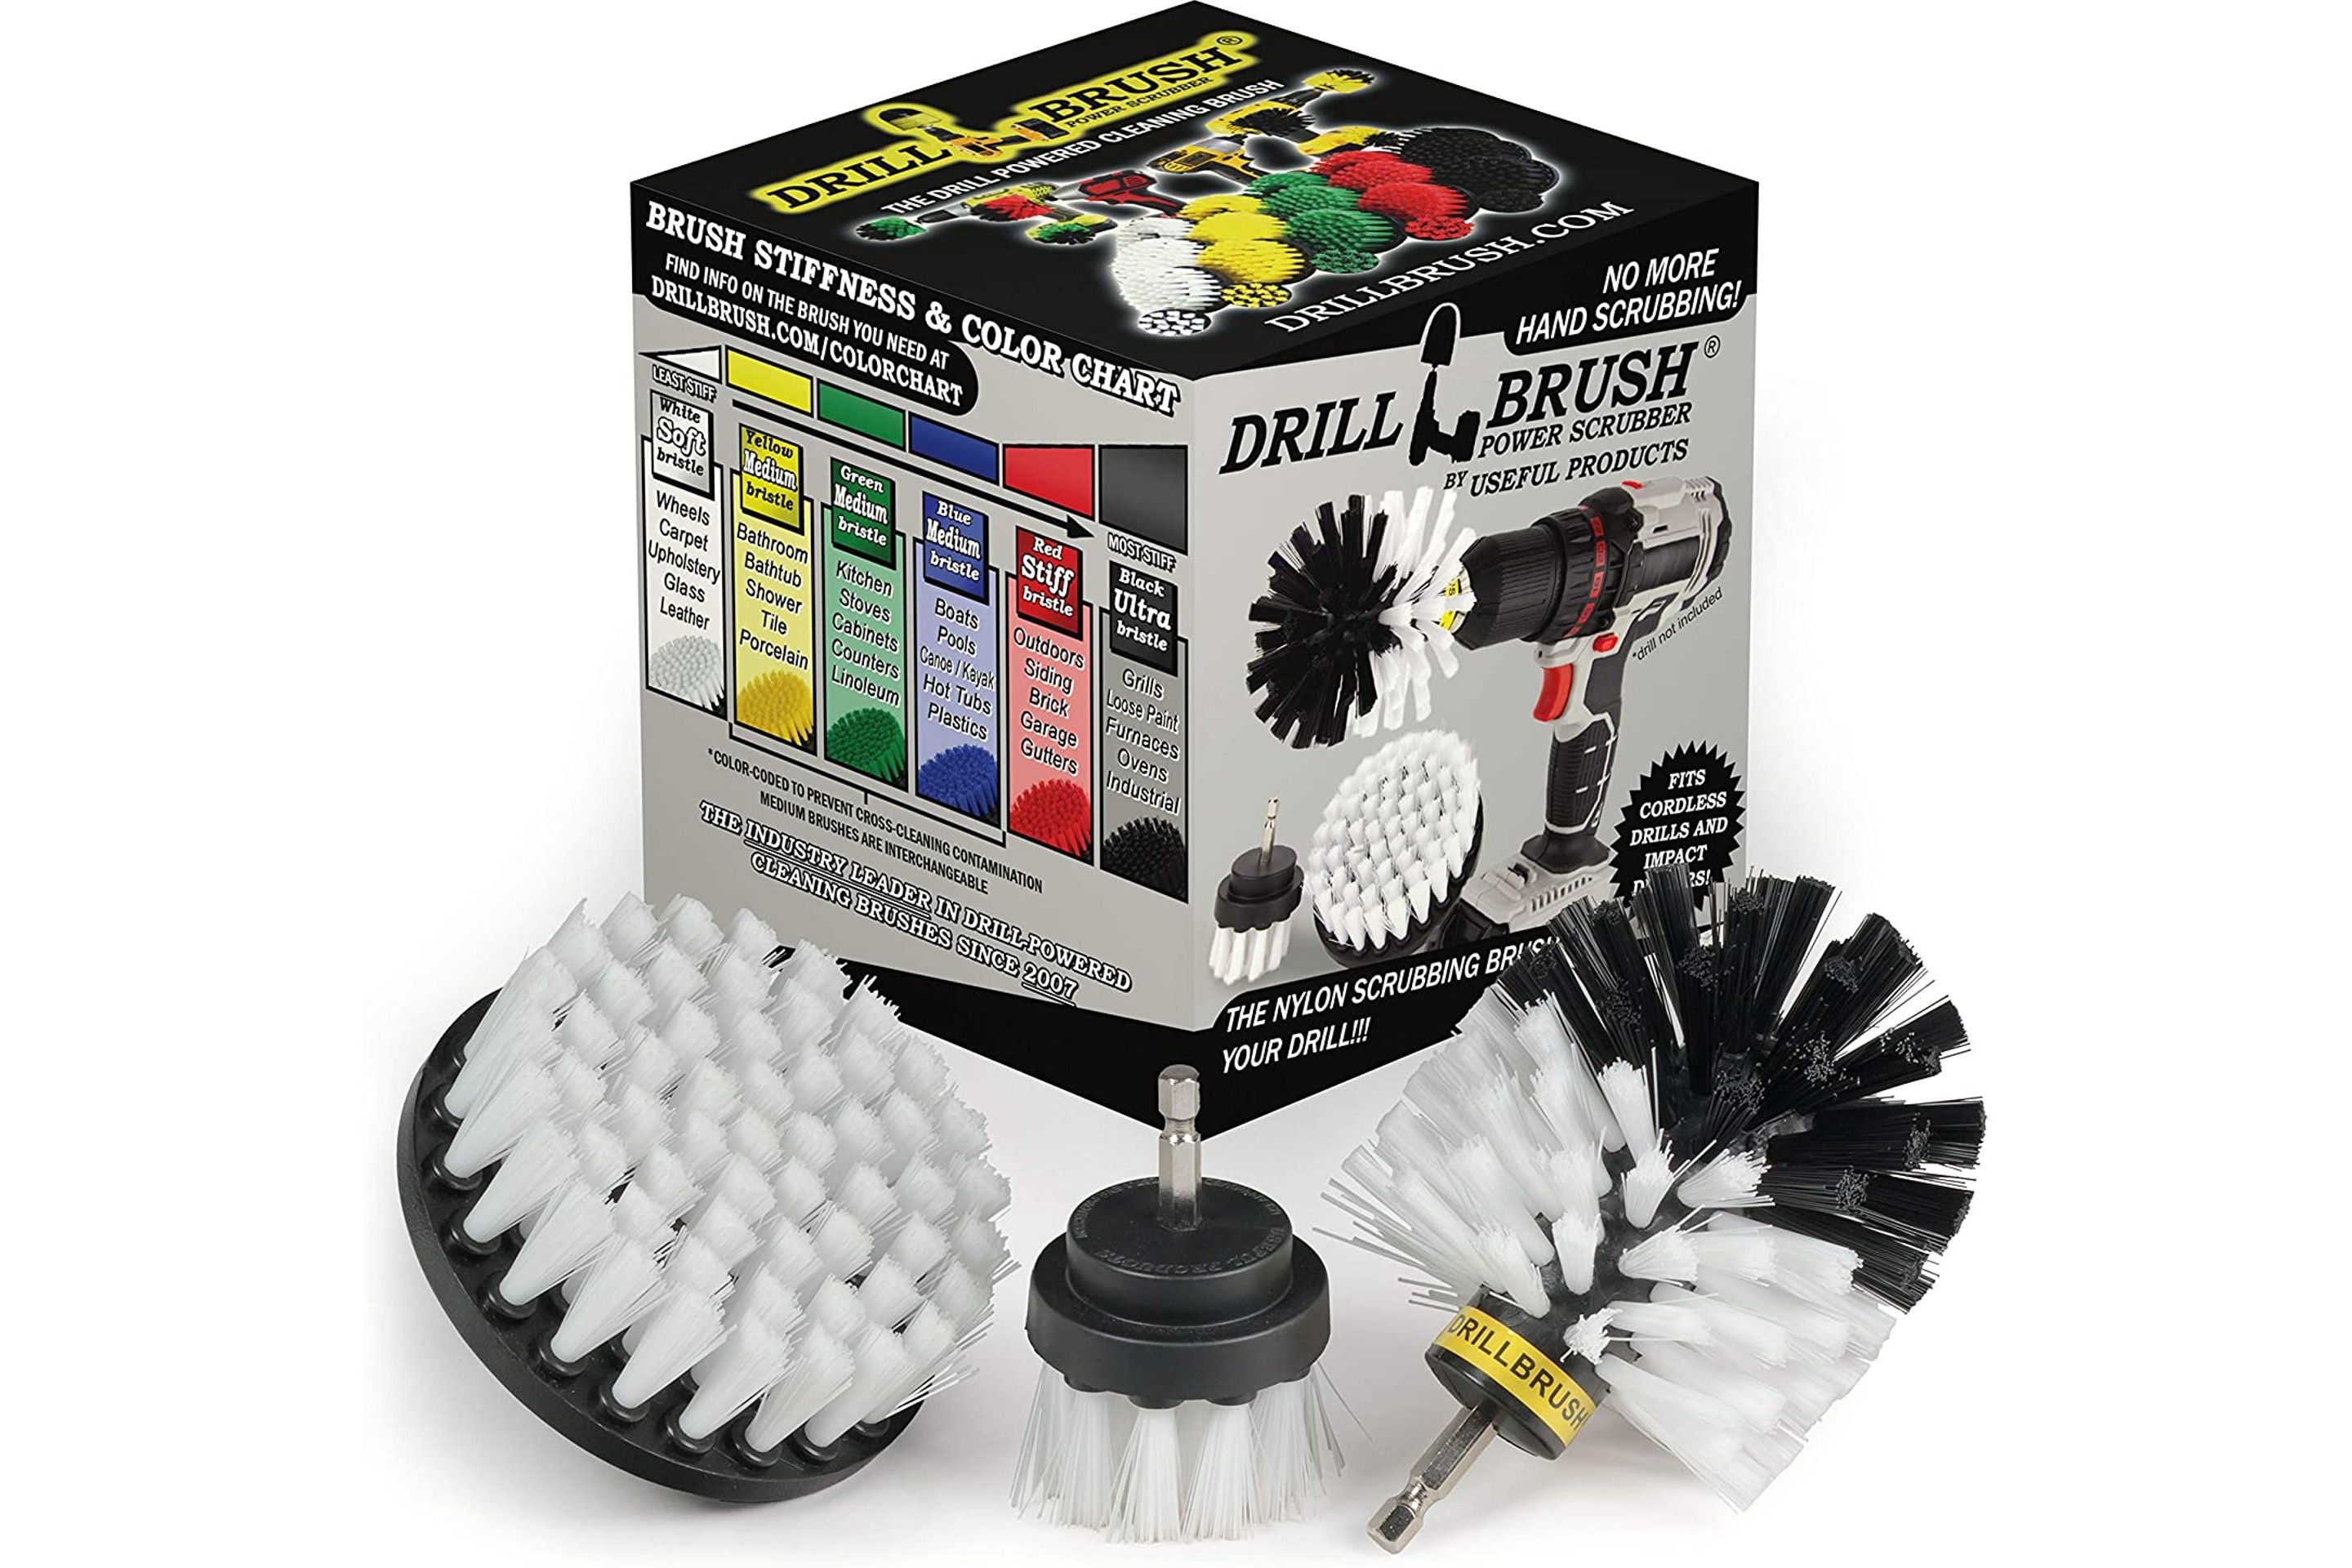 Drillbrush Power Scrubber Cleaning Tool